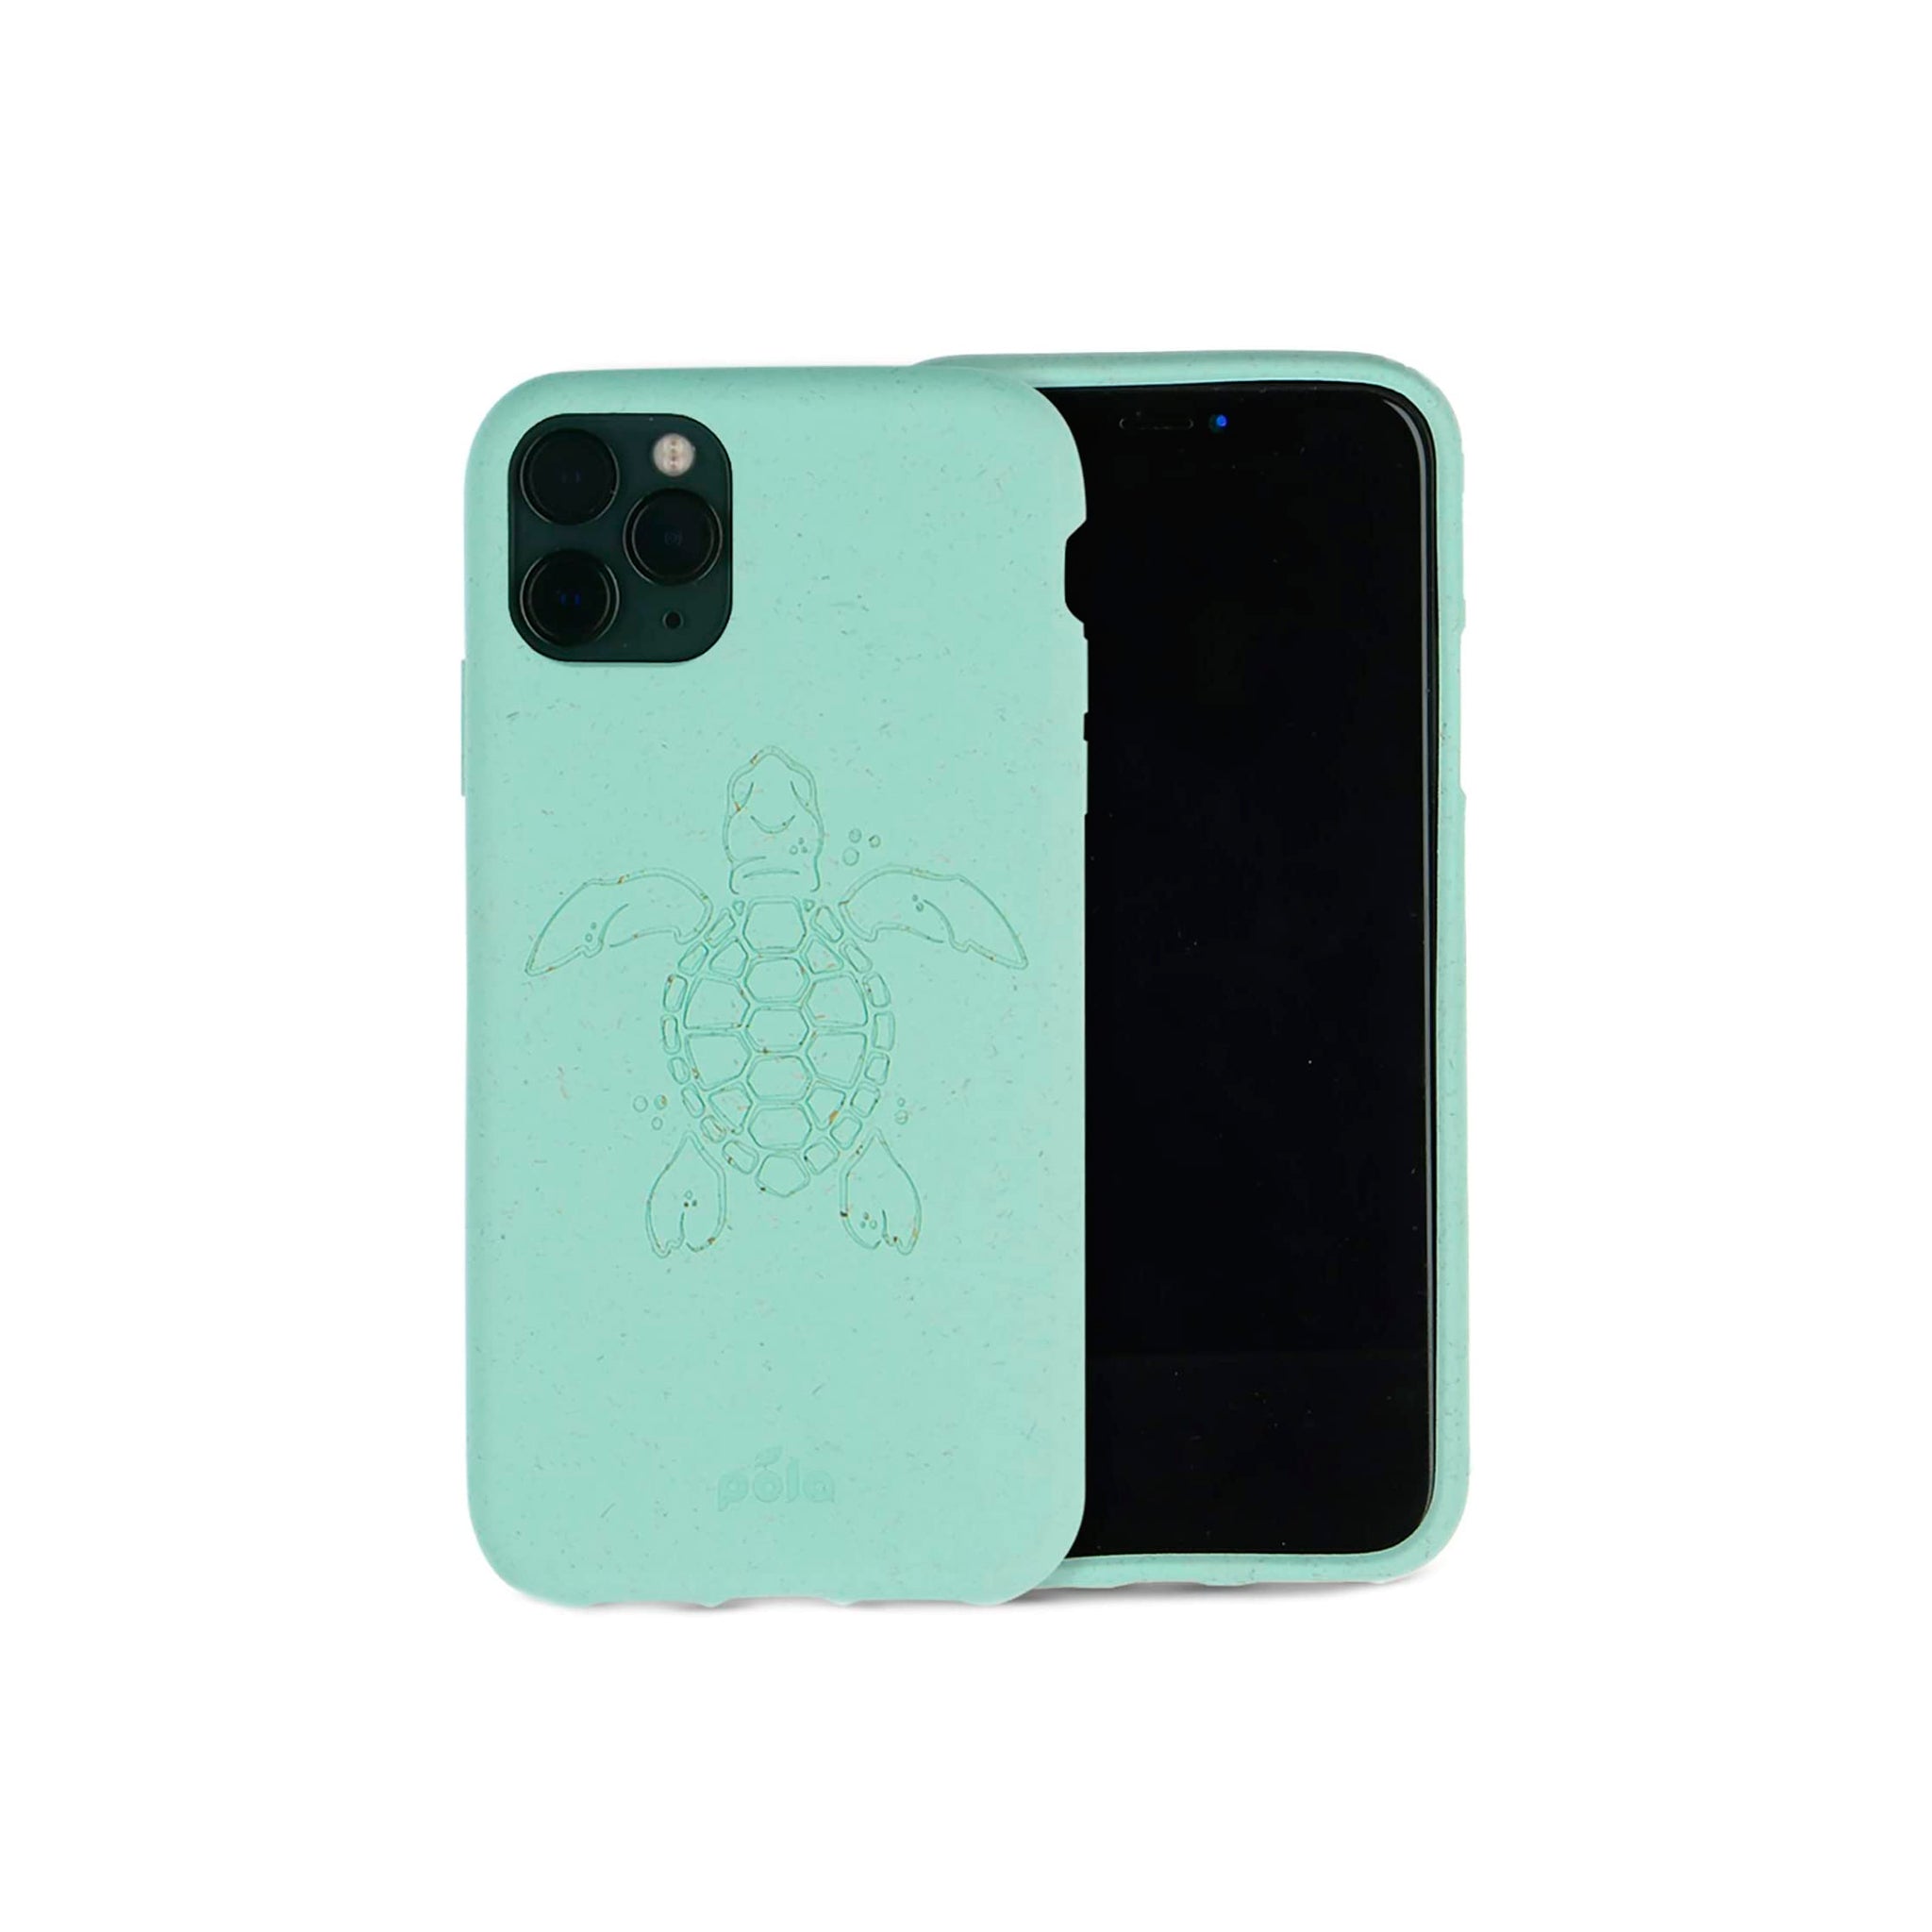 Pela - Eco Friendly Case For Apple Iphone 11 Pro Max - Ocean Turquoise Turtle Edition